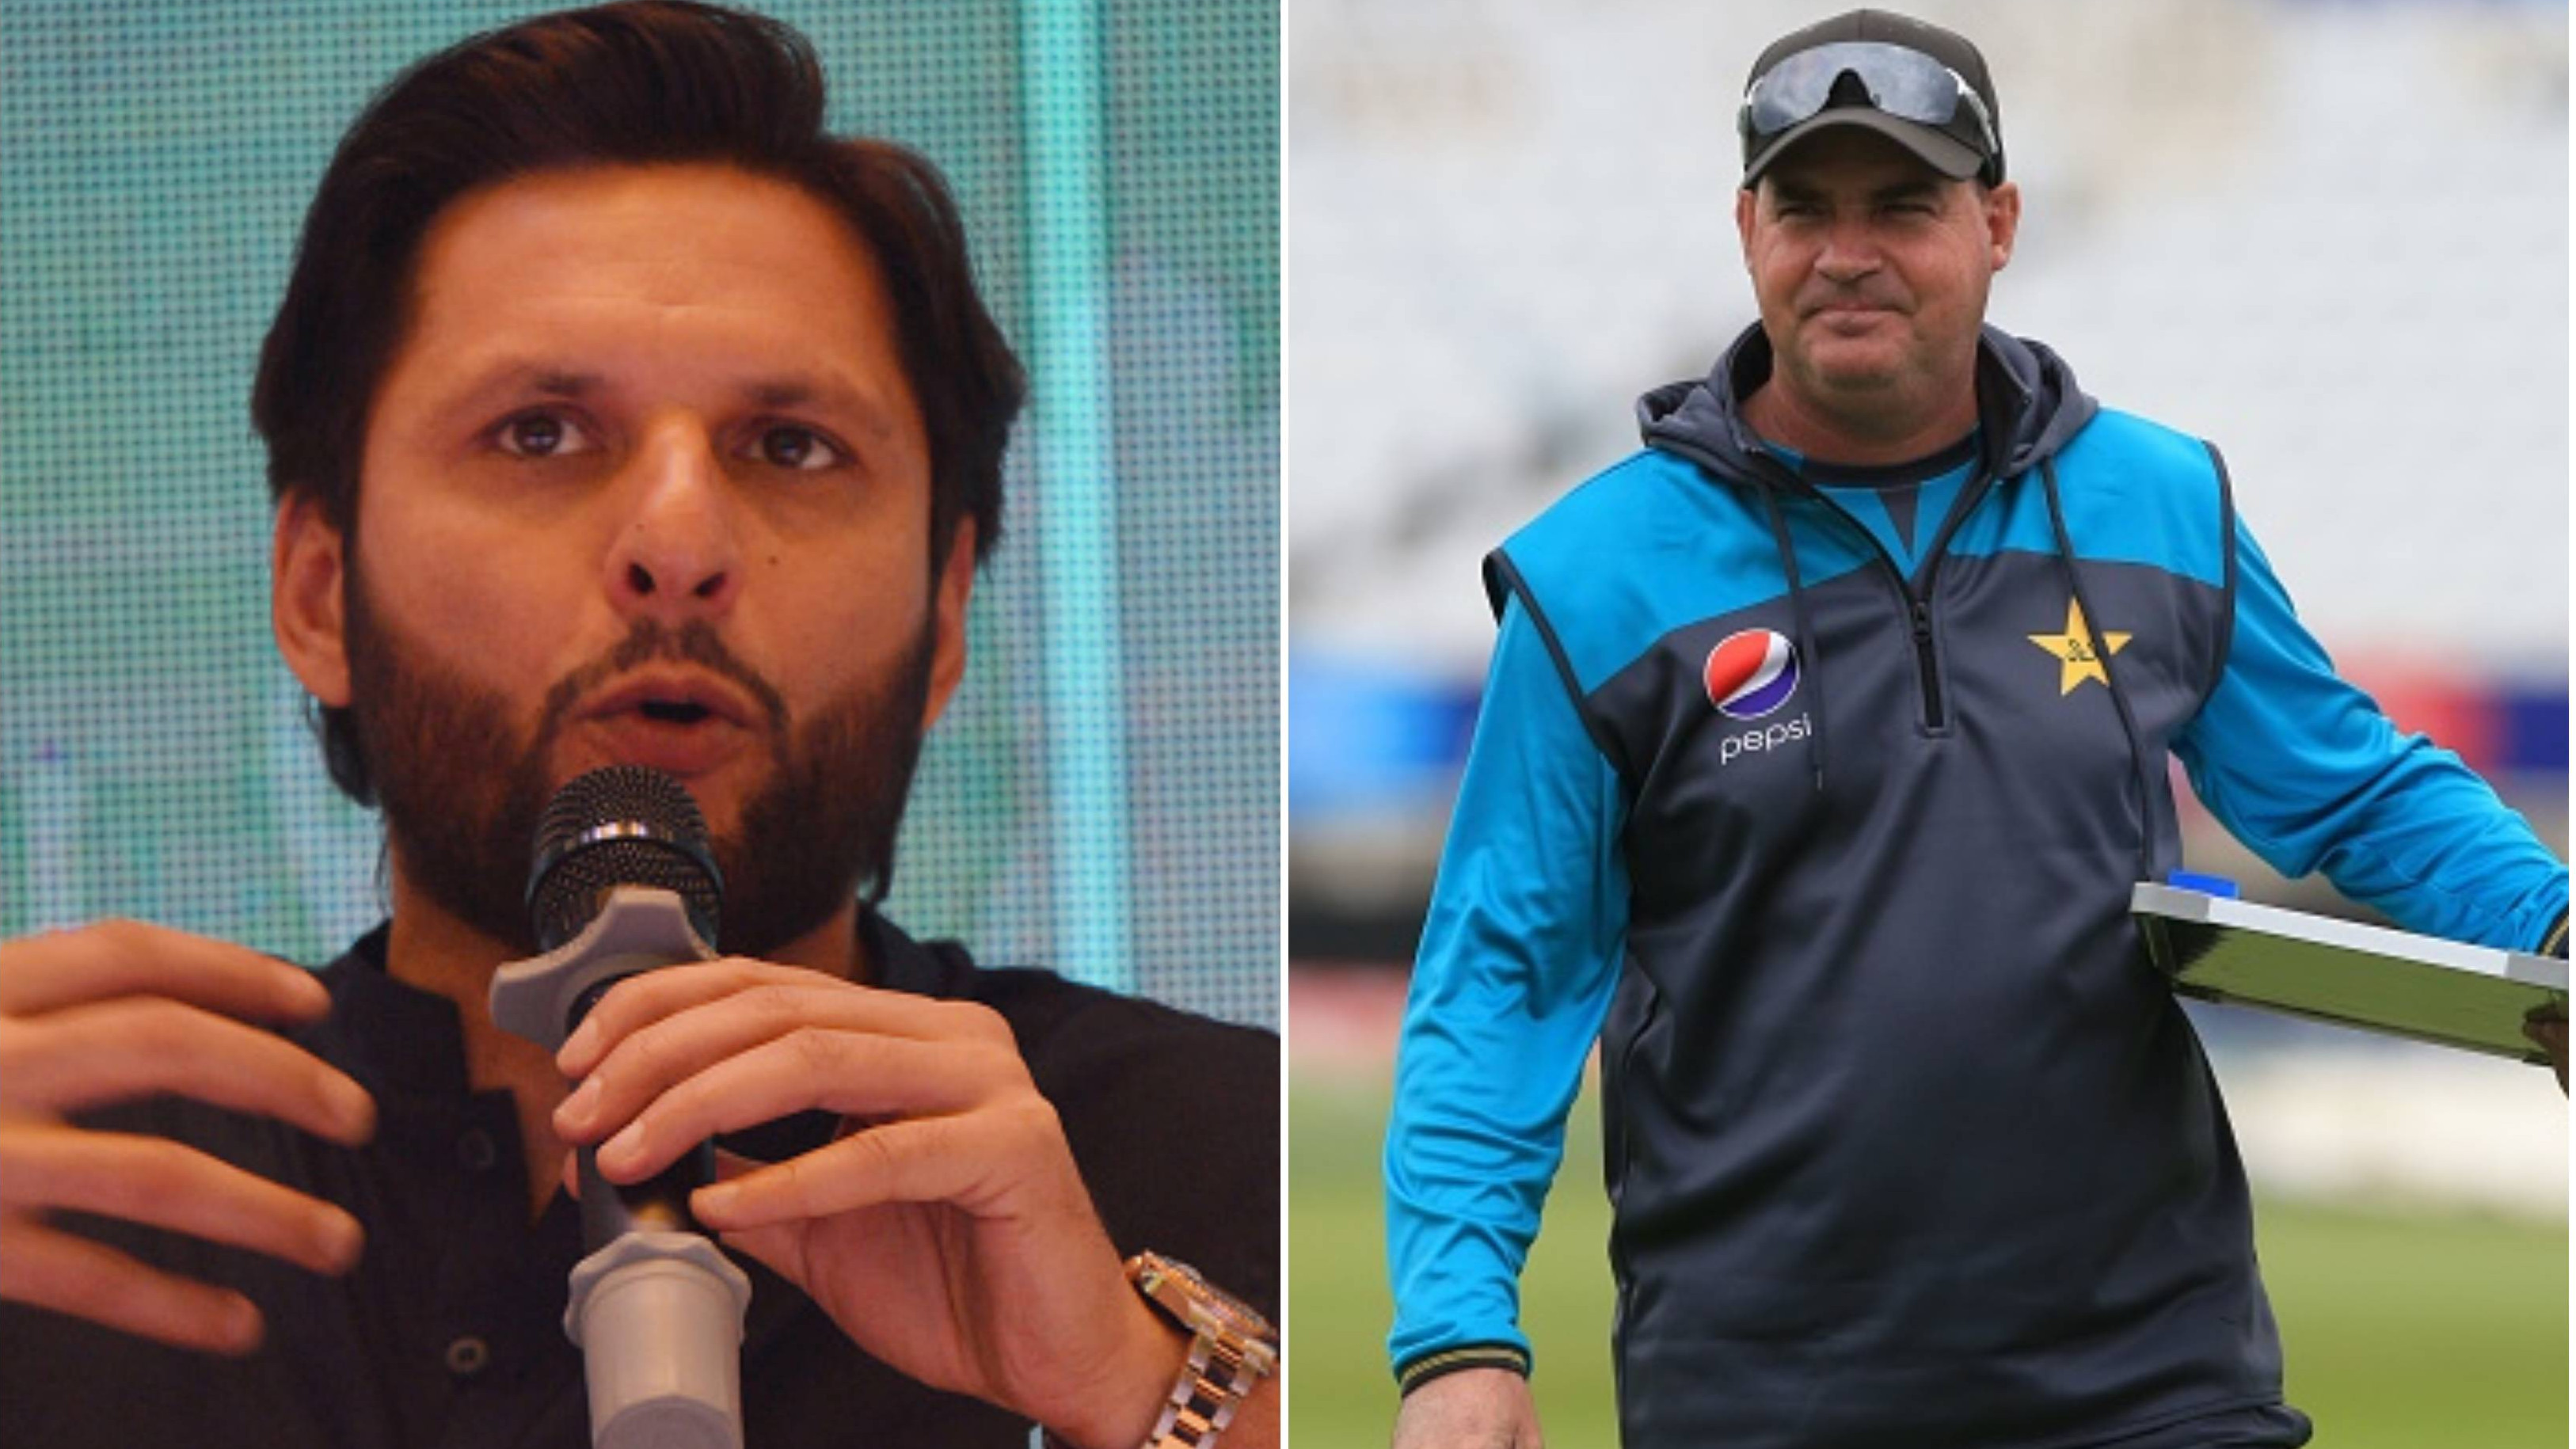 WATCH: “Beyond comprehension,” Afridi reacts to reports of Mickey Arthur’s return as Pakistan coach in online capacity